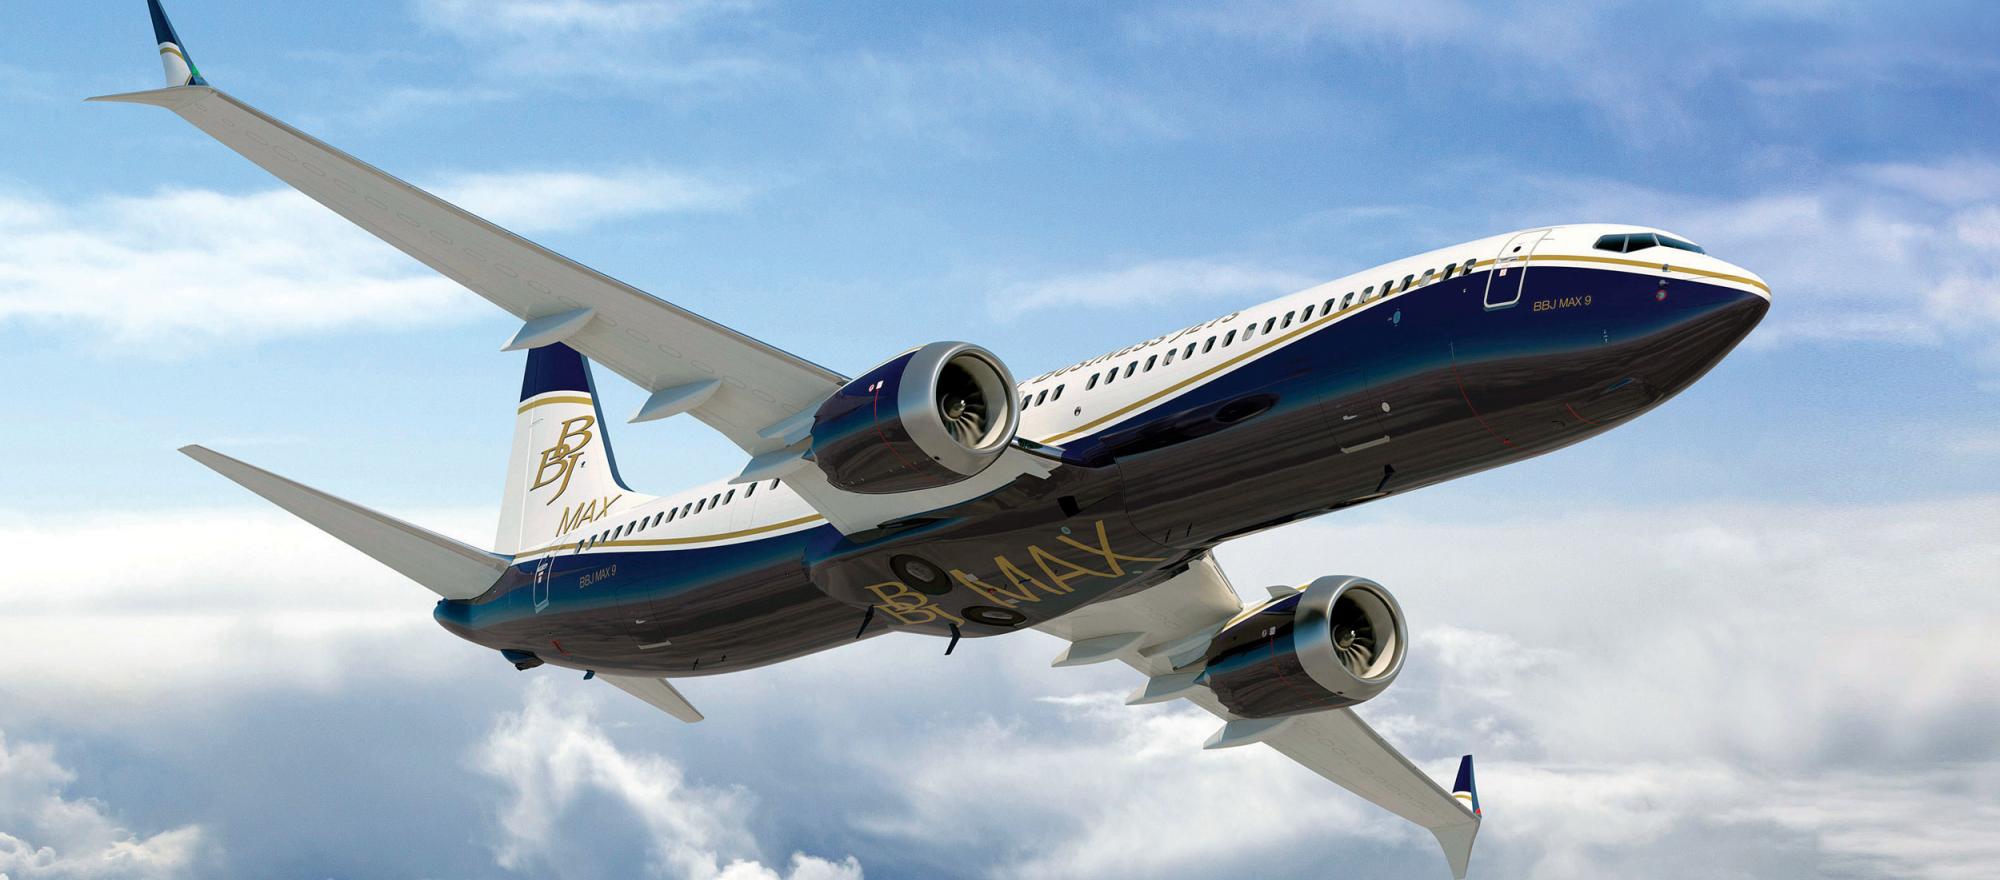 The BBJ Max 9 will offer a 6,255-nautical-mile range, a 16.2 percent jump from the BBJ3.